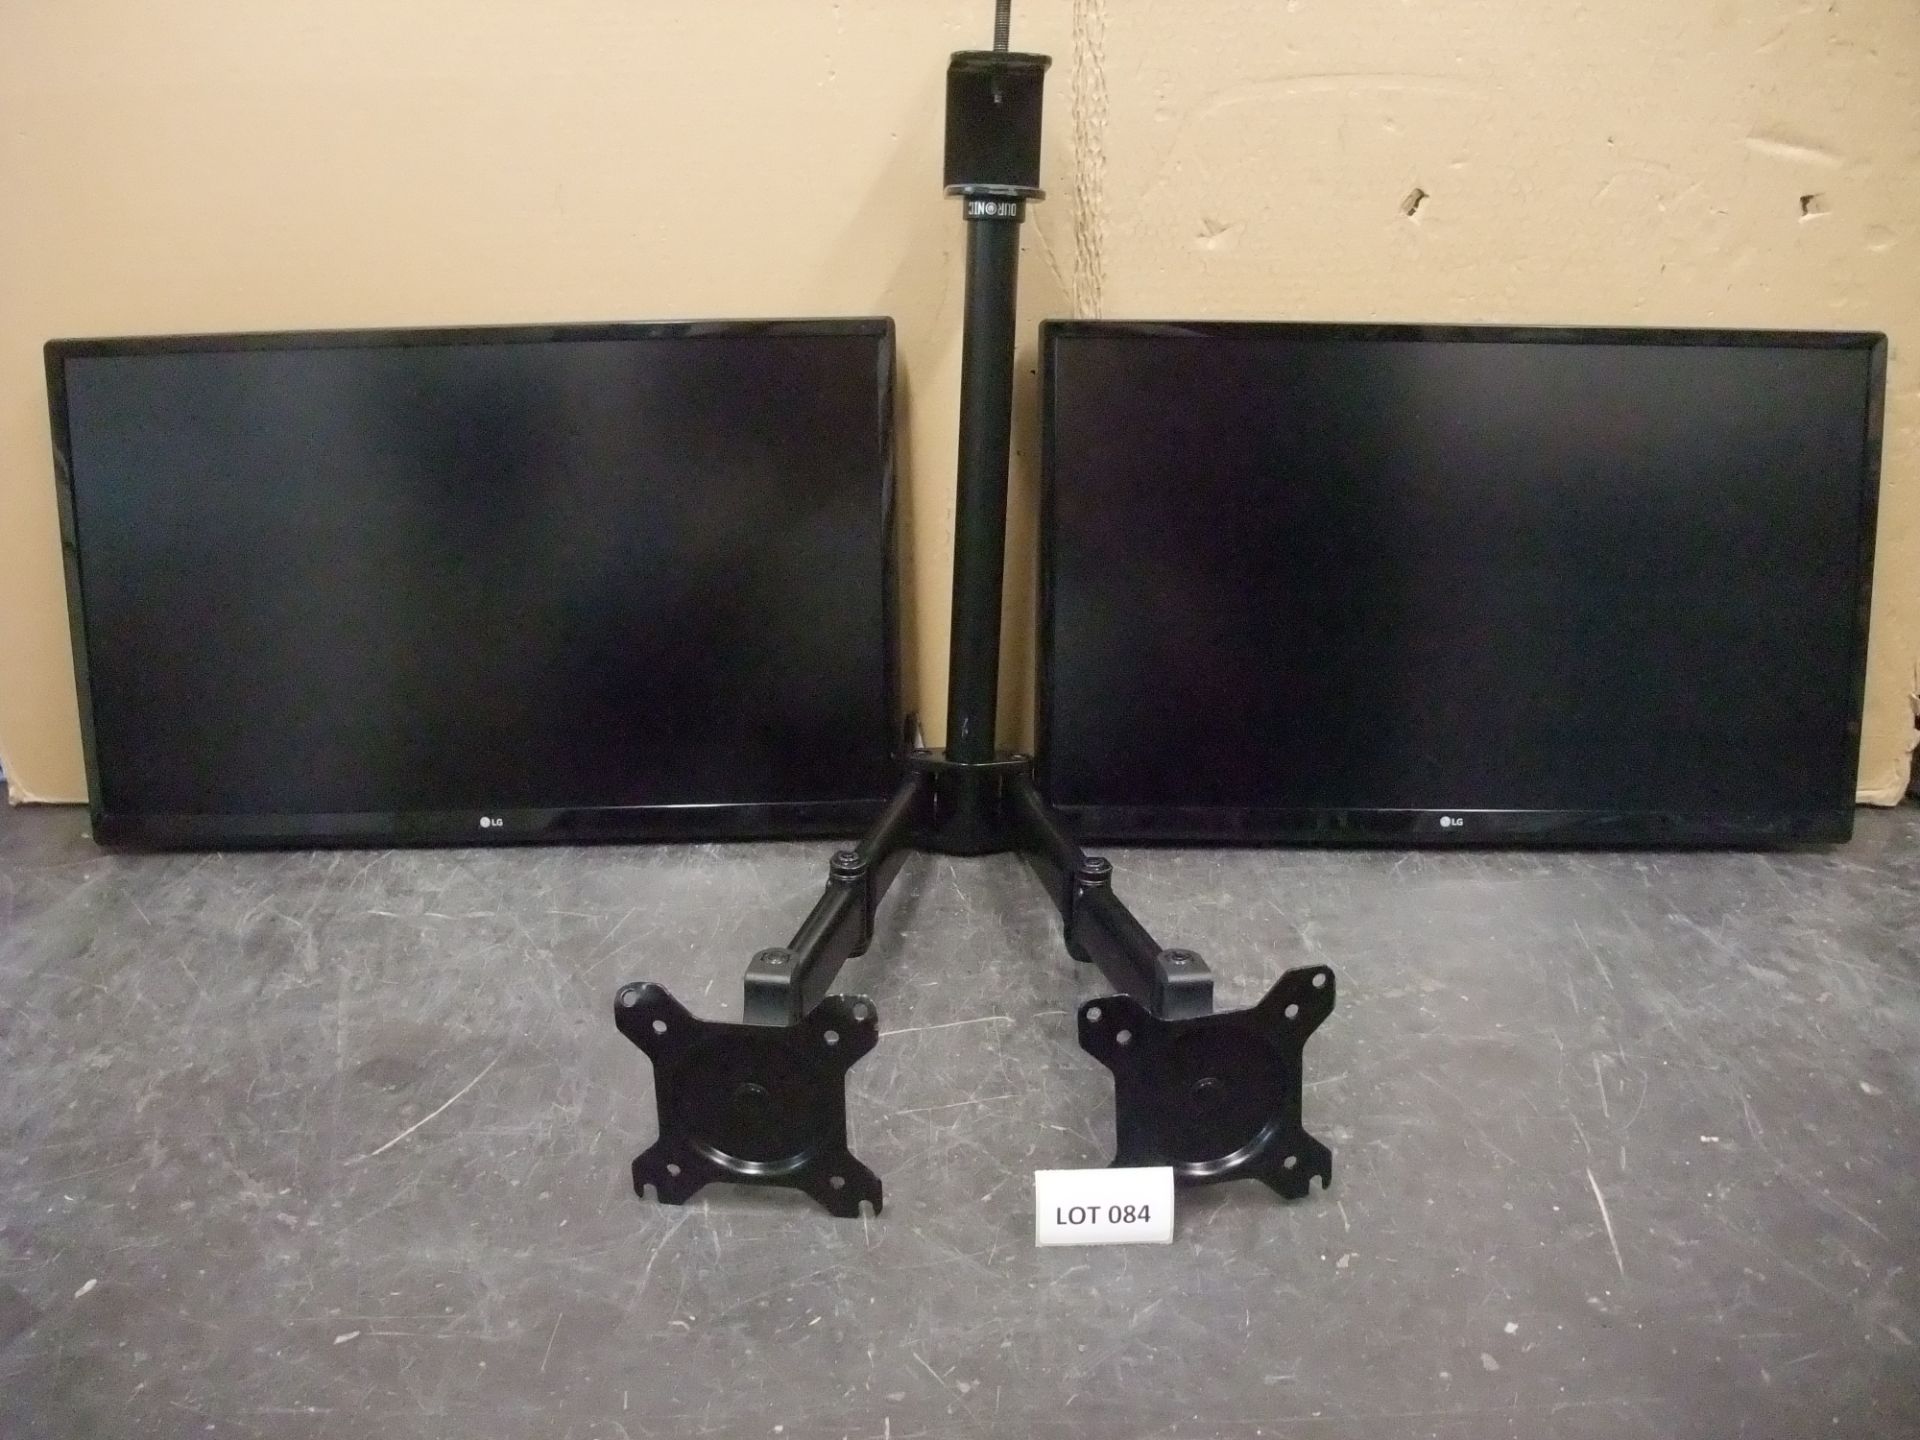 Two LG 24UD58-B 24in. Monitors, with twin deskmount monitor armsPlease read the following